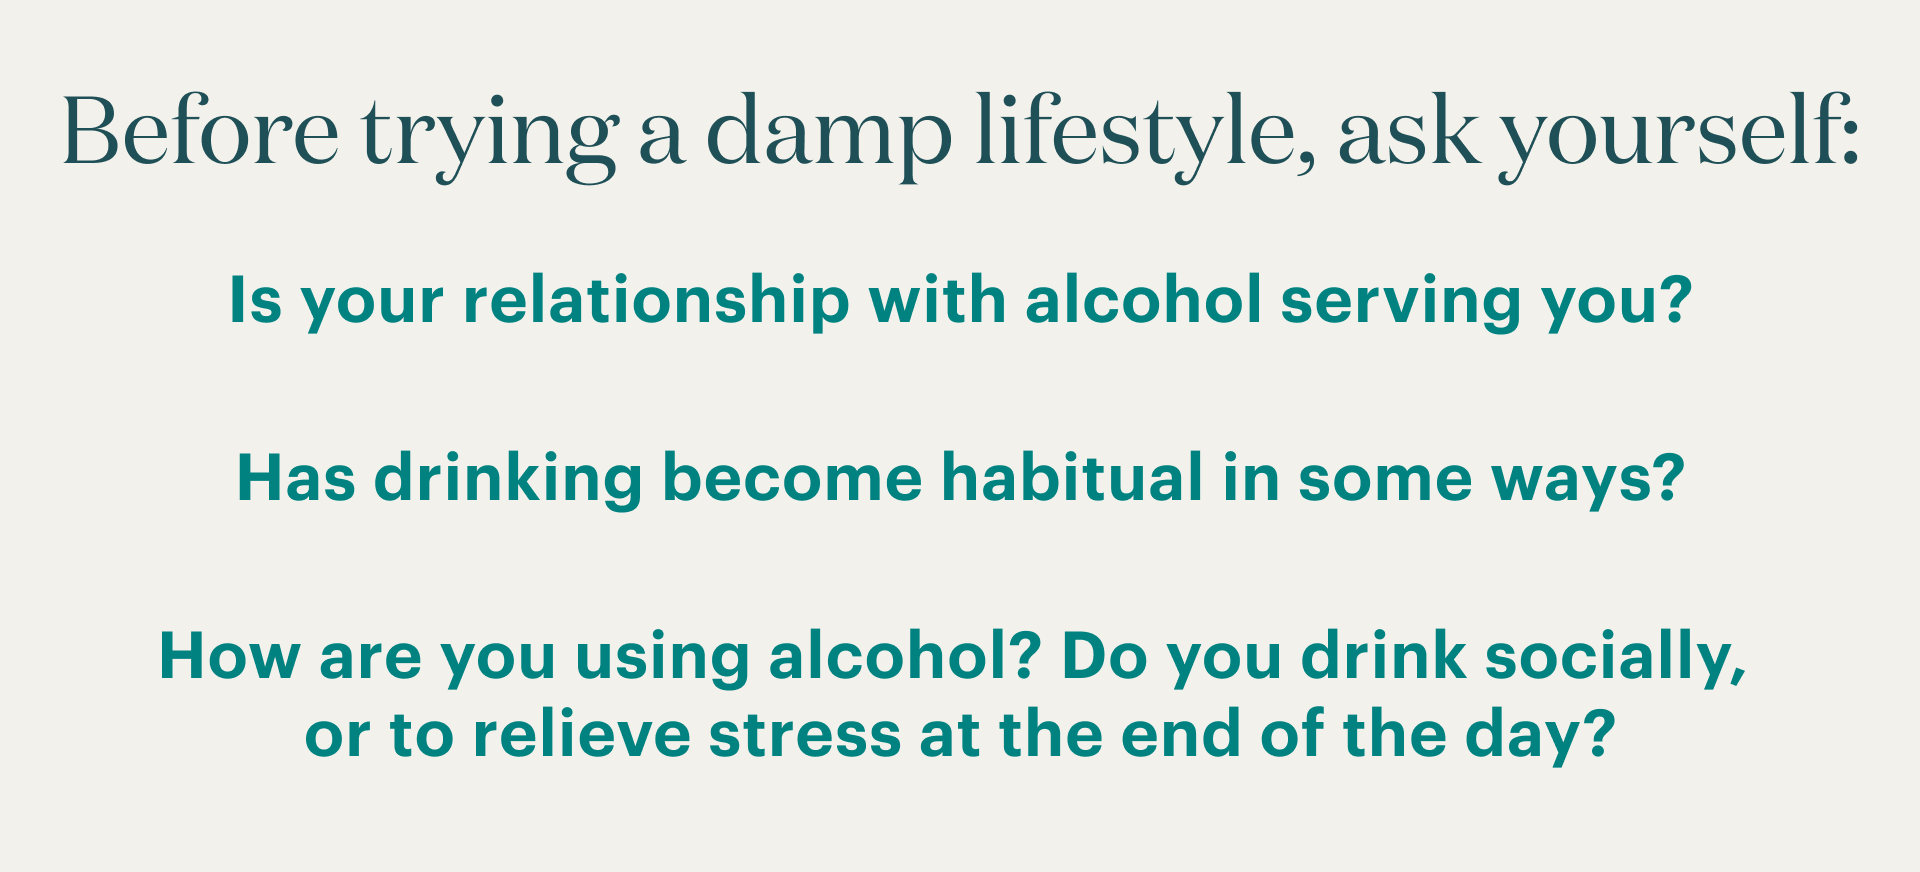 Questions to ask yourself before trying a damp lifestyle